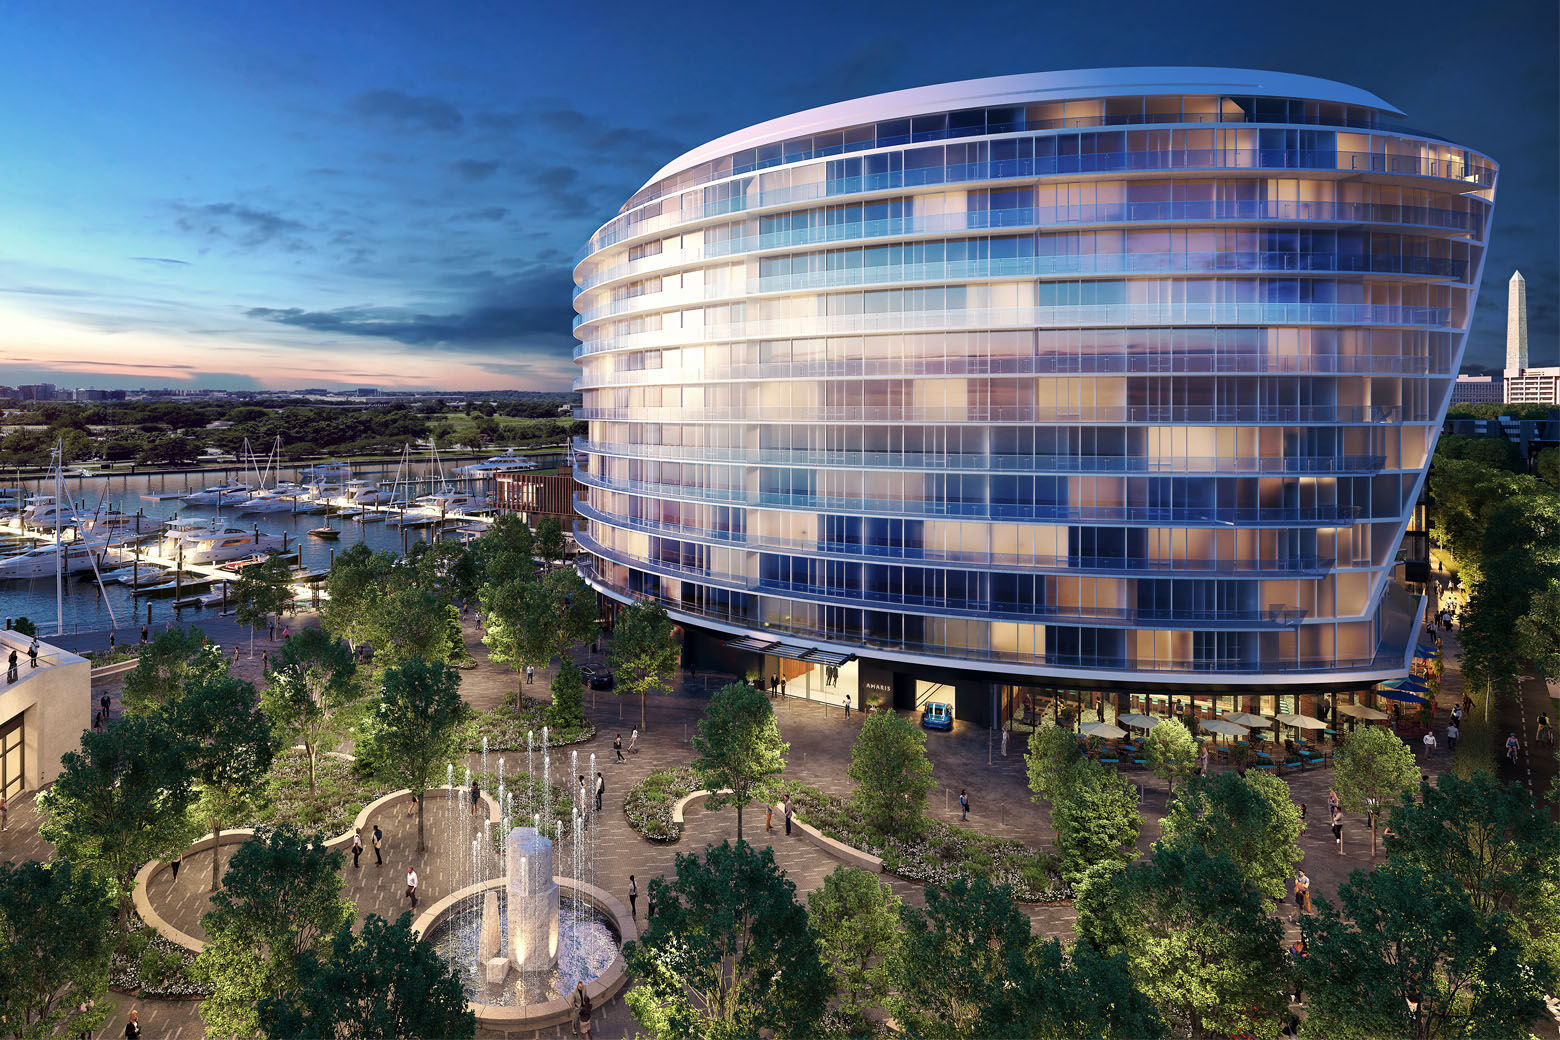 The 12-story, 96-unit waterfront Amaris condominium will add an unusual twist to Southwest D.C.’s skyline, with its curved, glass-walled design. (Courtesy Hoffman-Madison Waterfront)